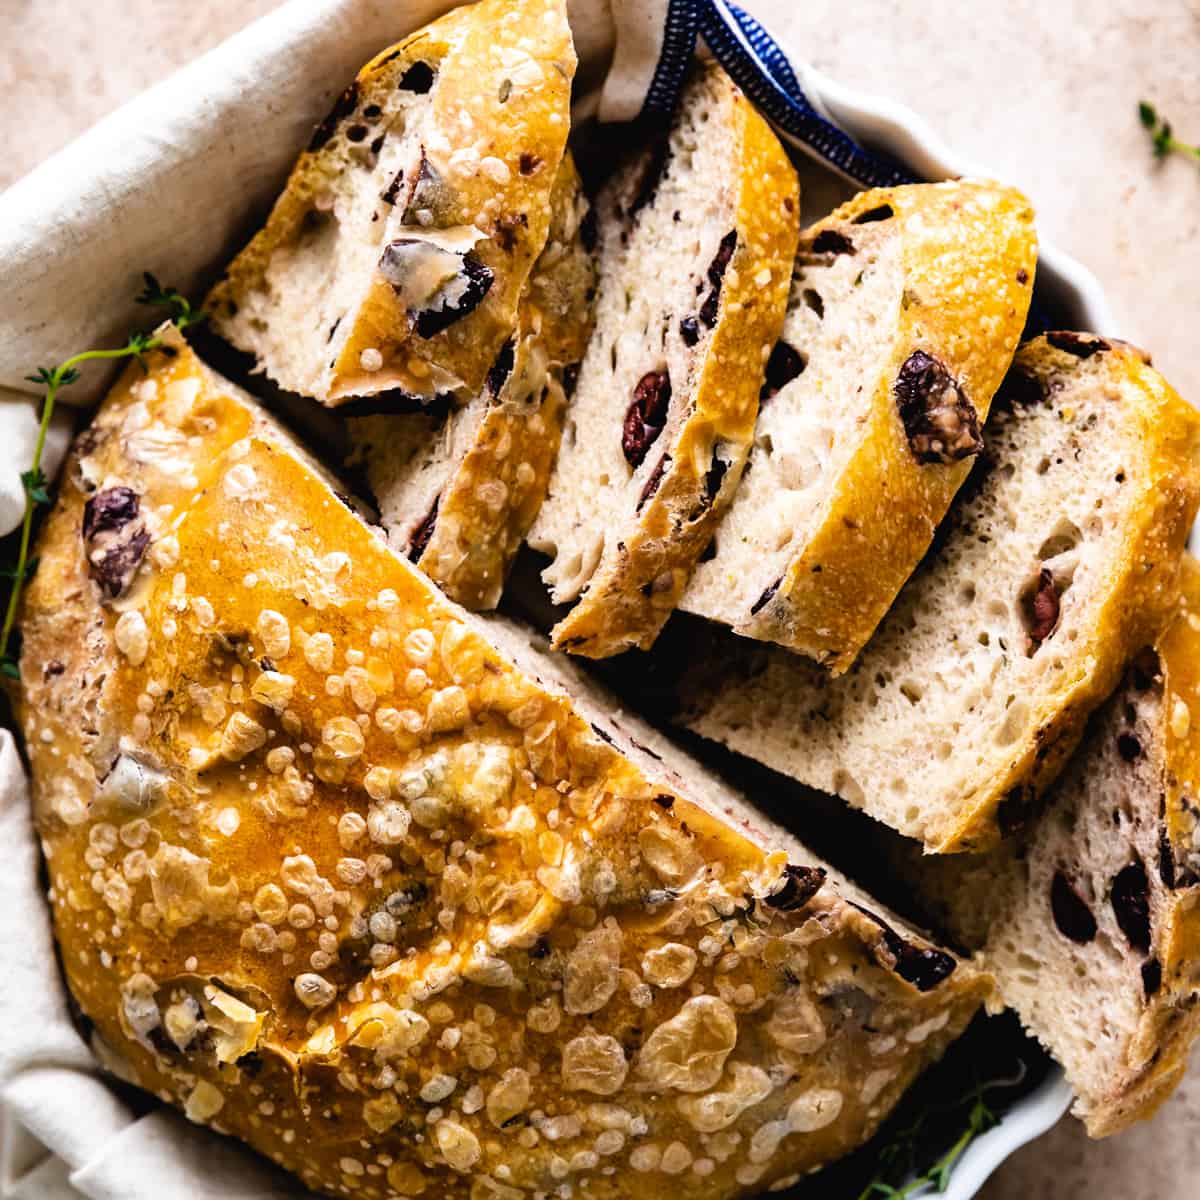 What to serve with olive bread